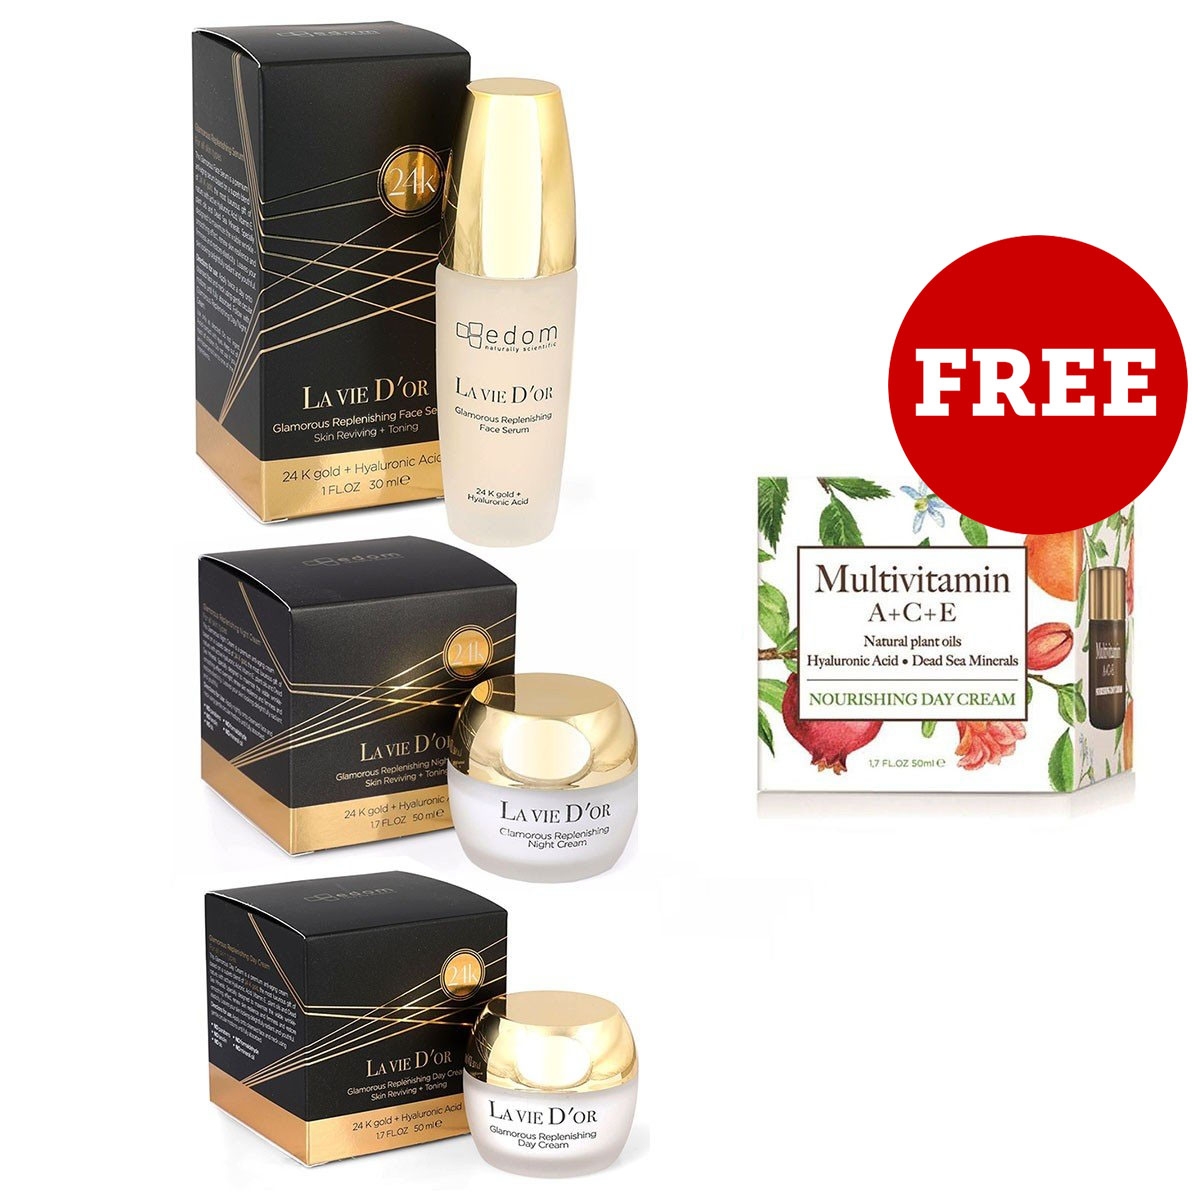 Edom La Vie D'Or Facial Set: Buy Three Replenishing Face Products, Get Edom Multivitamin Cream For FREE!!! - 1